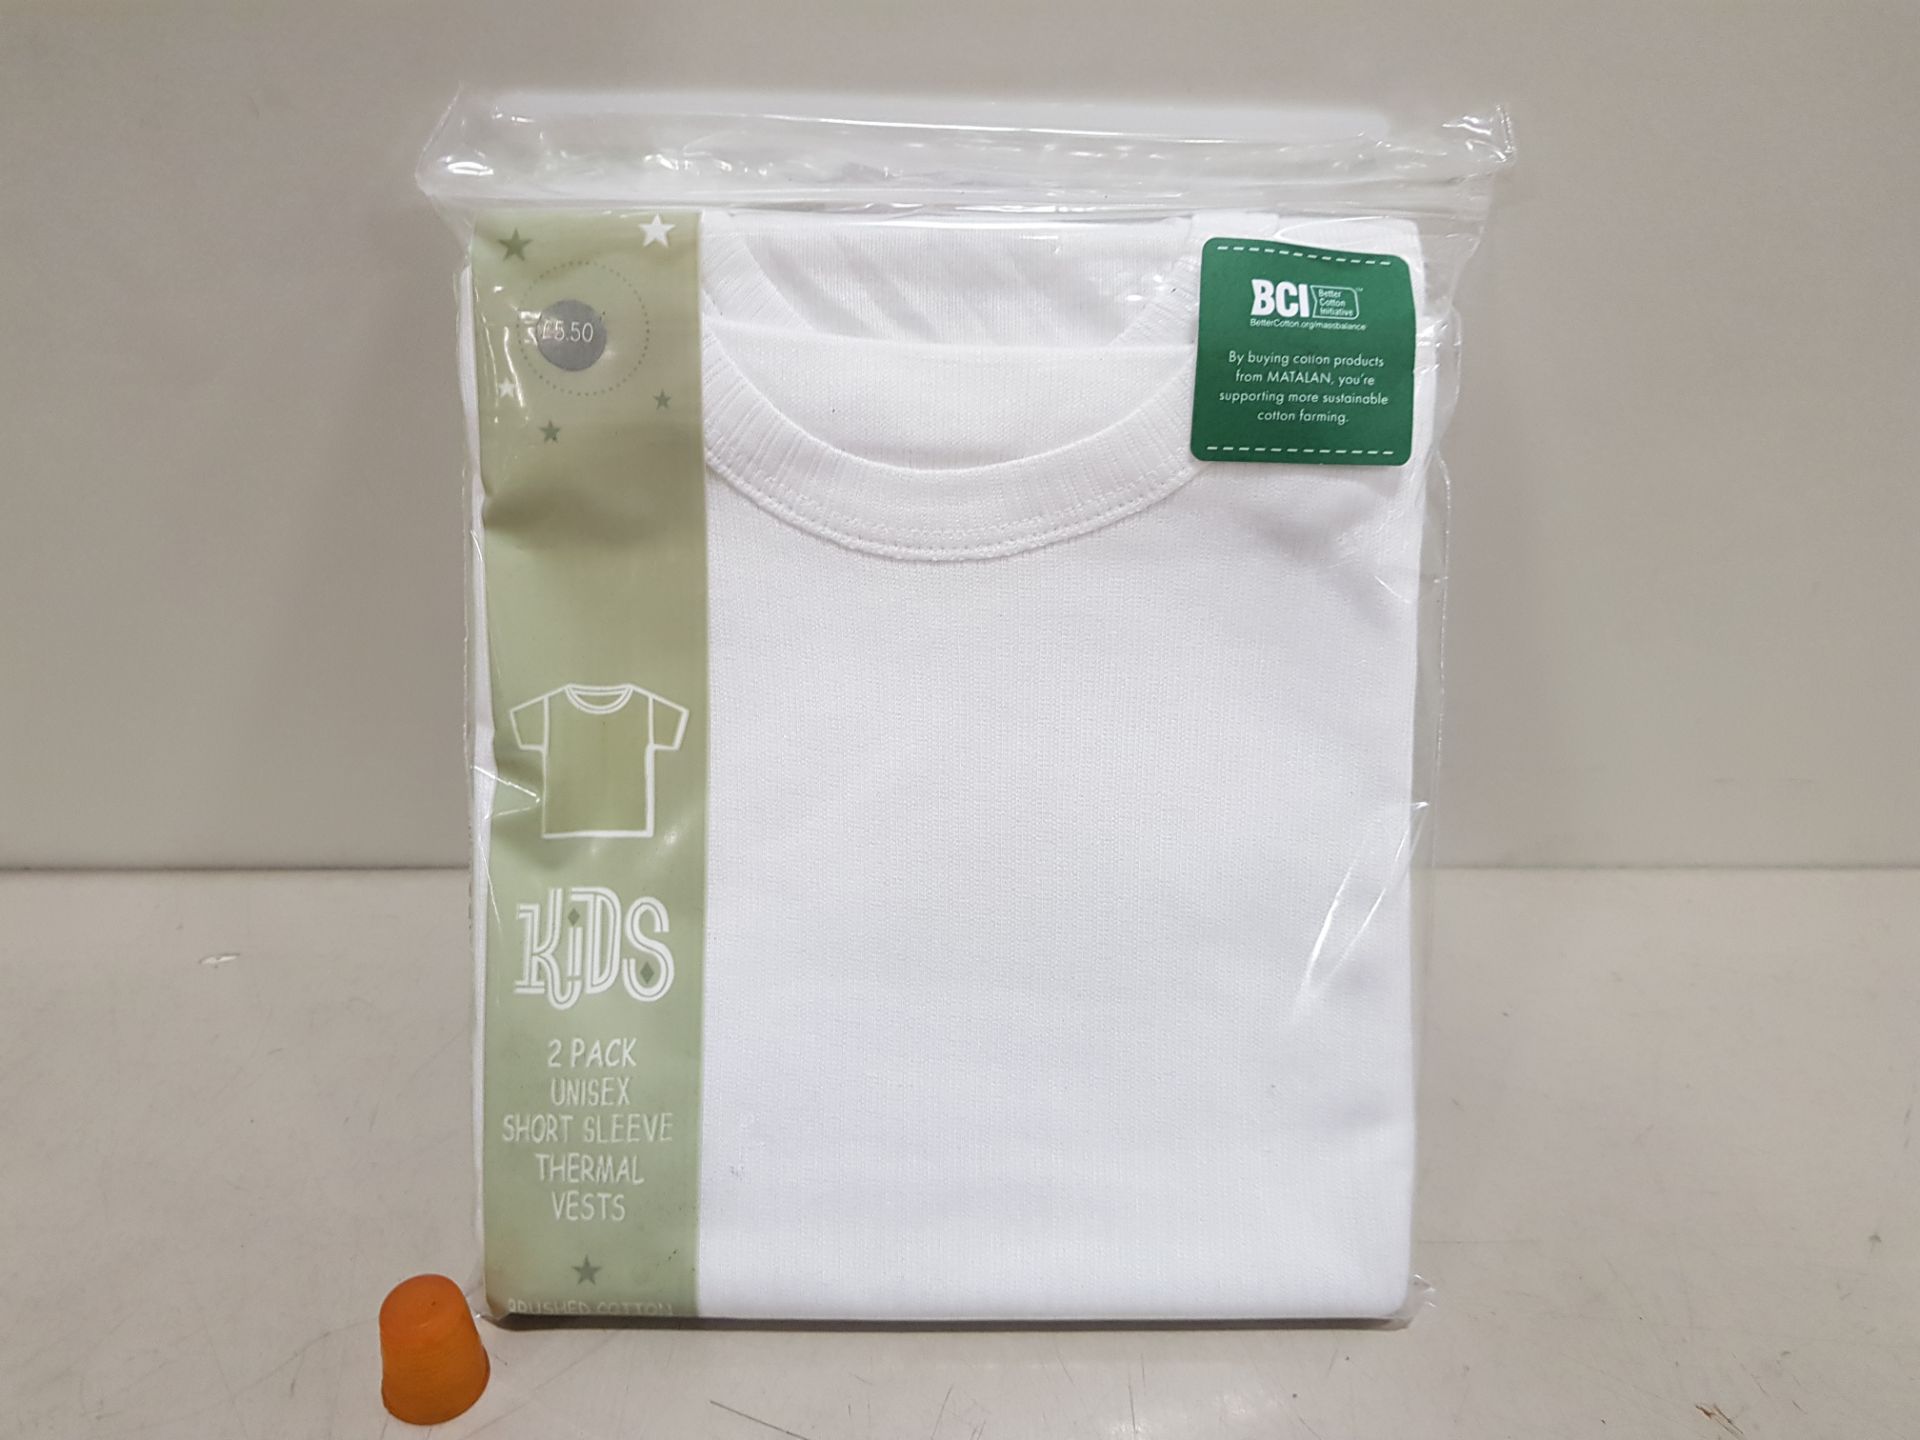 49 X BRAND NEW KIDS UNISEX SHORT SLEEVE THERMAL VESTS - ALL IN SIZE 4-5 YRS - RRP £ 5.00 PP TOTAL